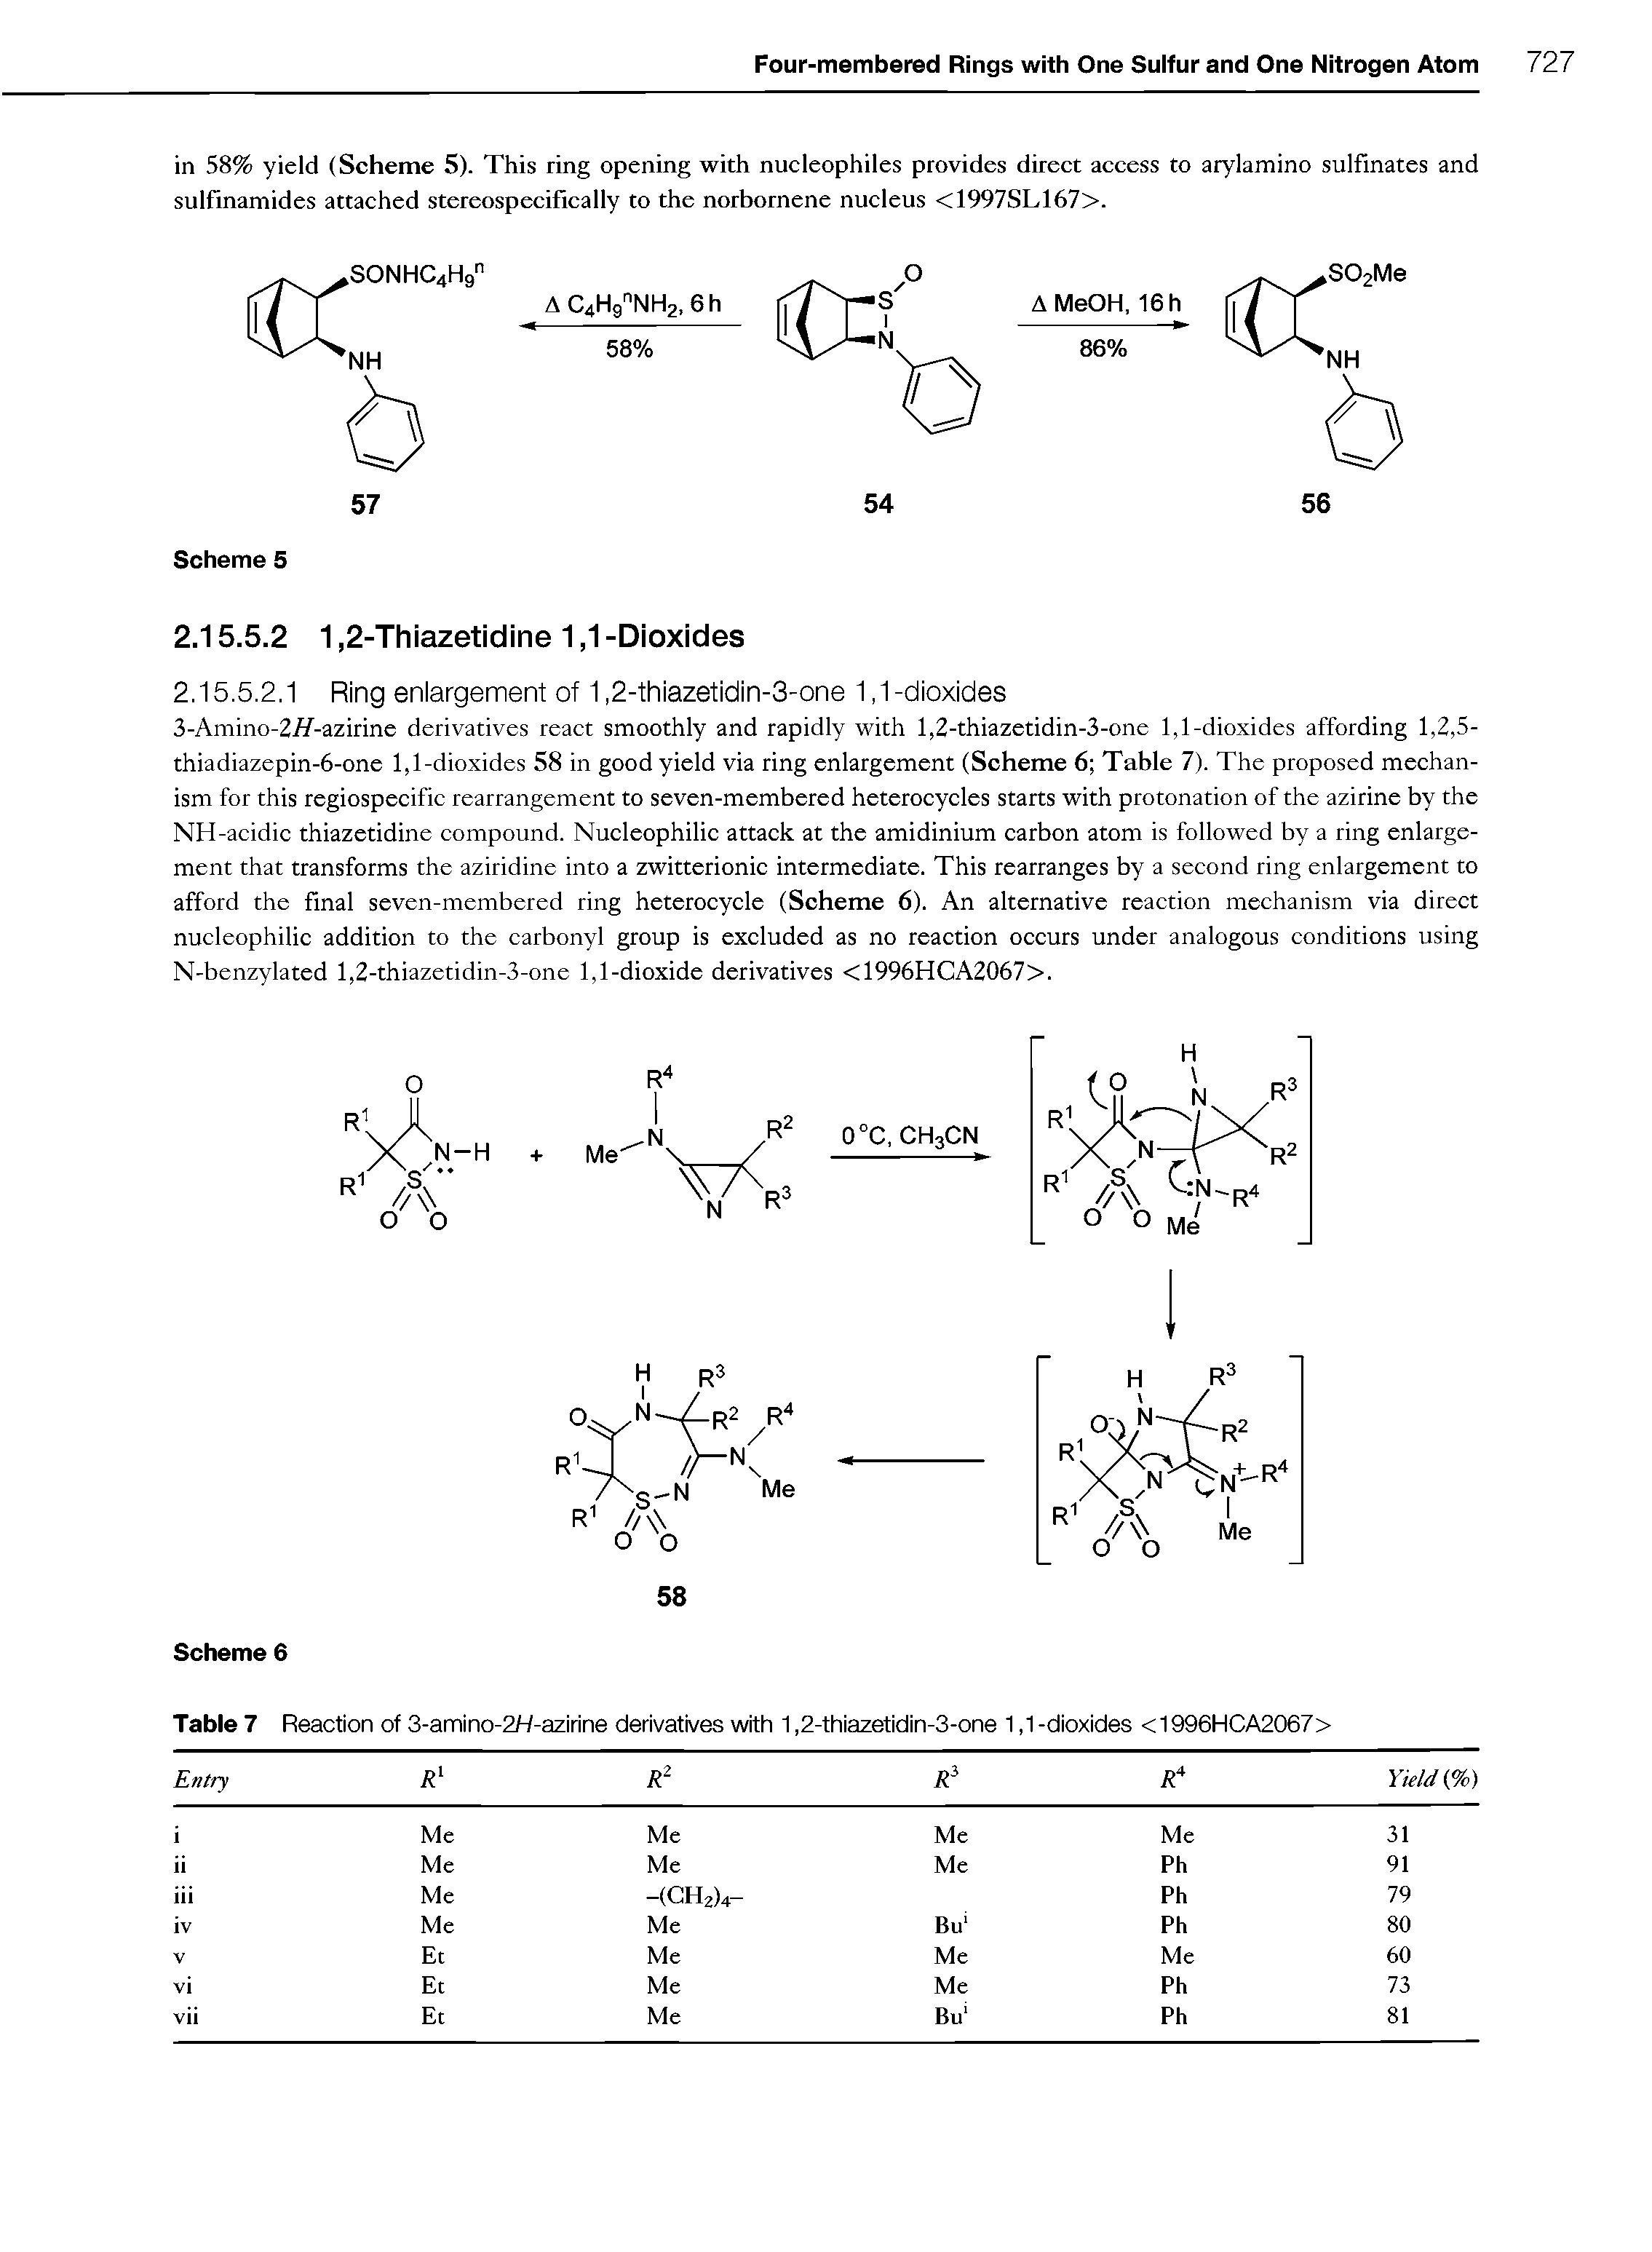 Table 7 Reaction of 3-amino-2H-azirine derivatives with 1,2-thiazetidin-3-one 1,1-dioxides <1996HCA2067>...